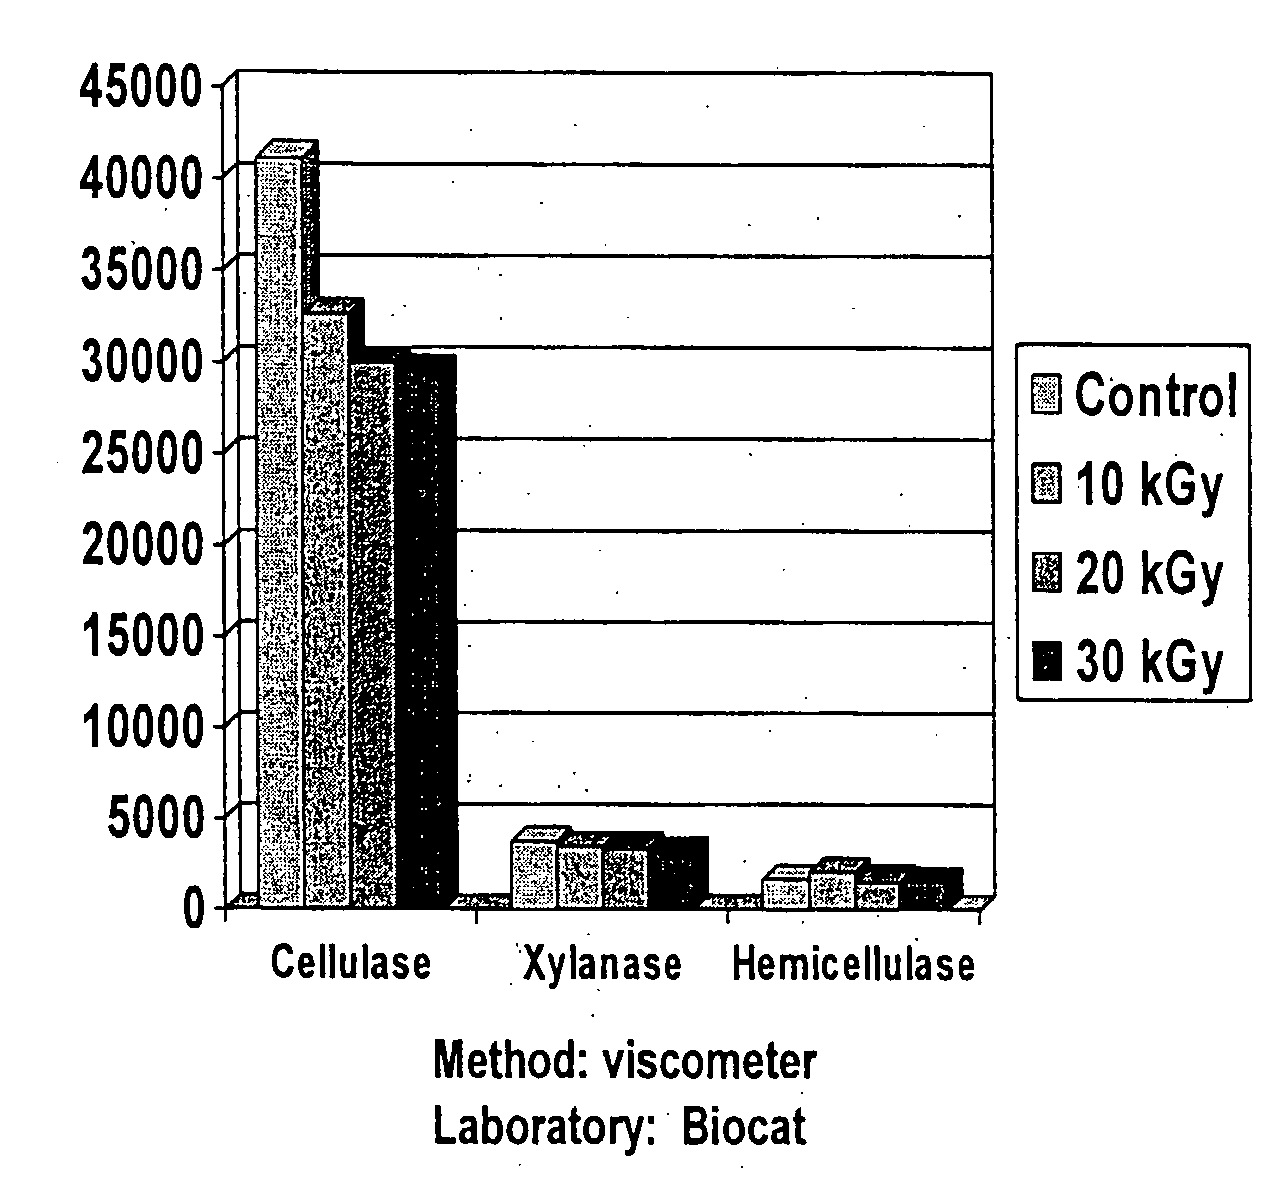 Effect of radiation on cellulase enzymes